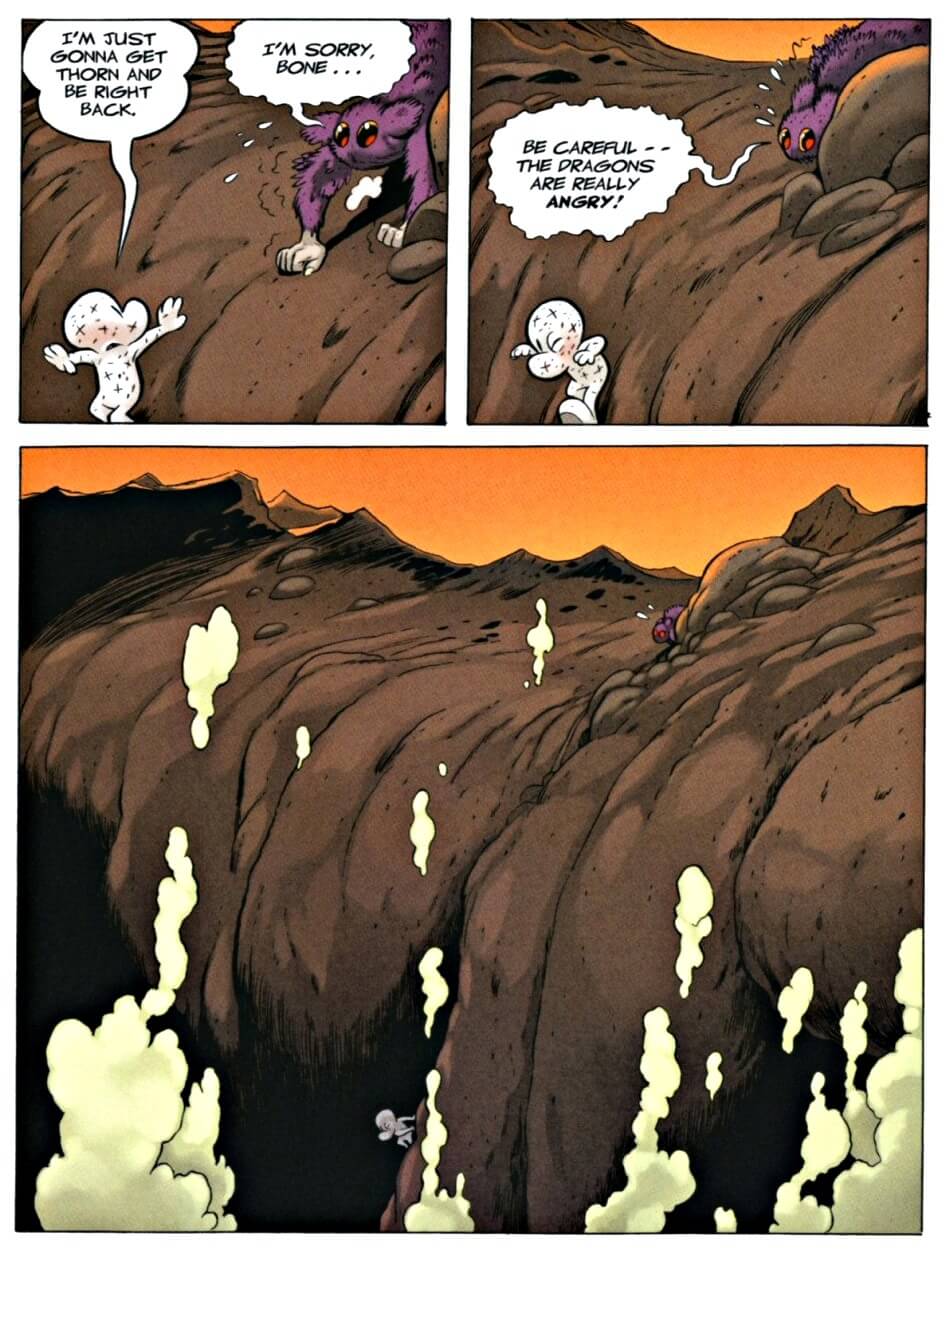 page 115 chapter 4 of bone 9 crown of horns graphic novel